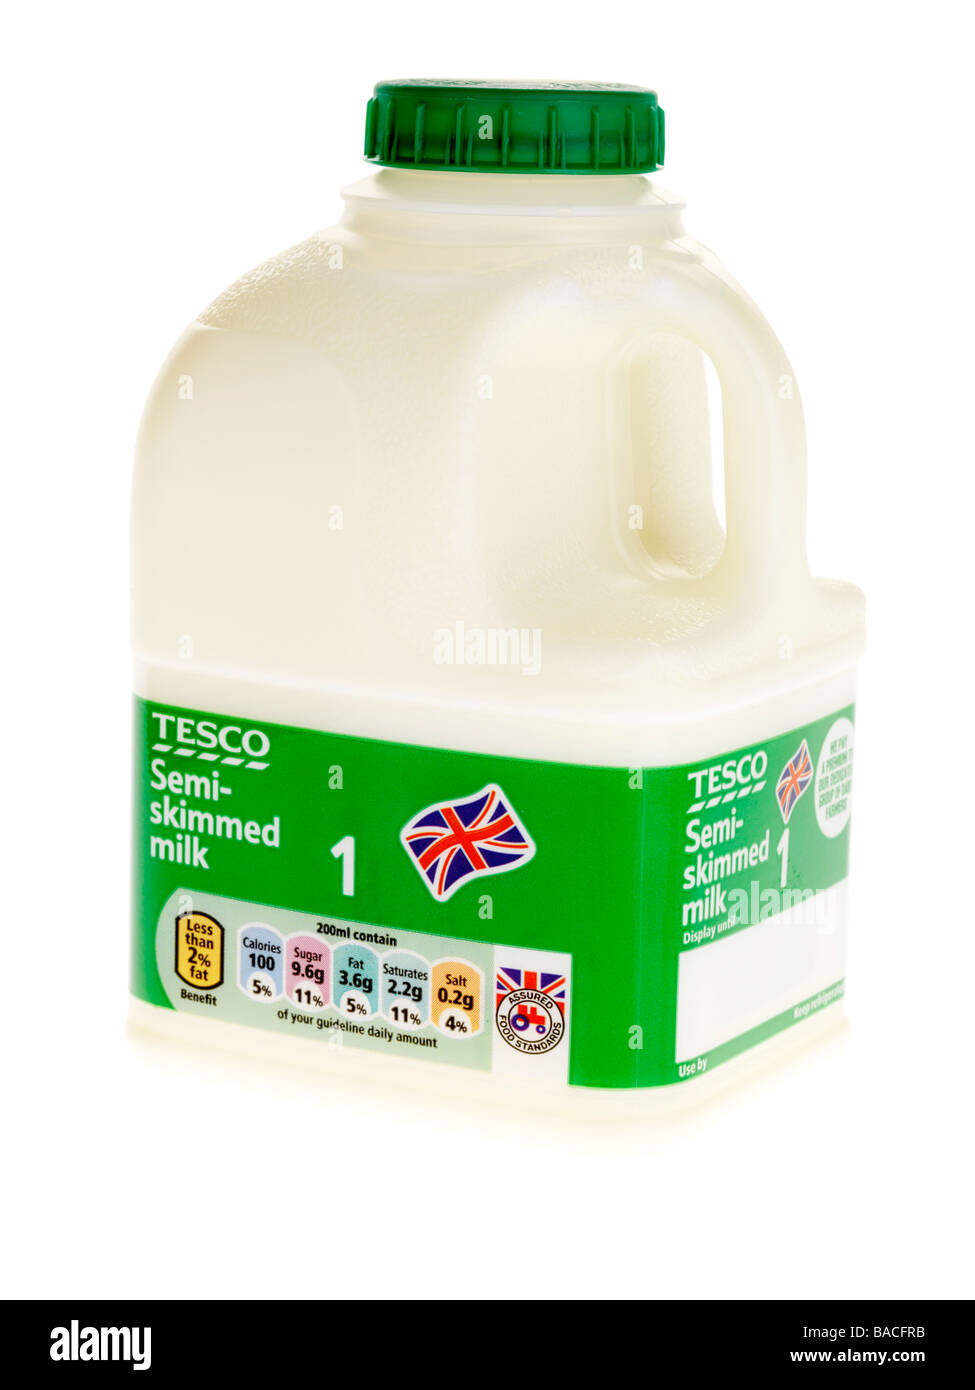 Tesco Branded Plastic Pint Bottle Of Semi Skimmed Milk Isolated Against A White Background With No People And A Clipping Path Stock Photo